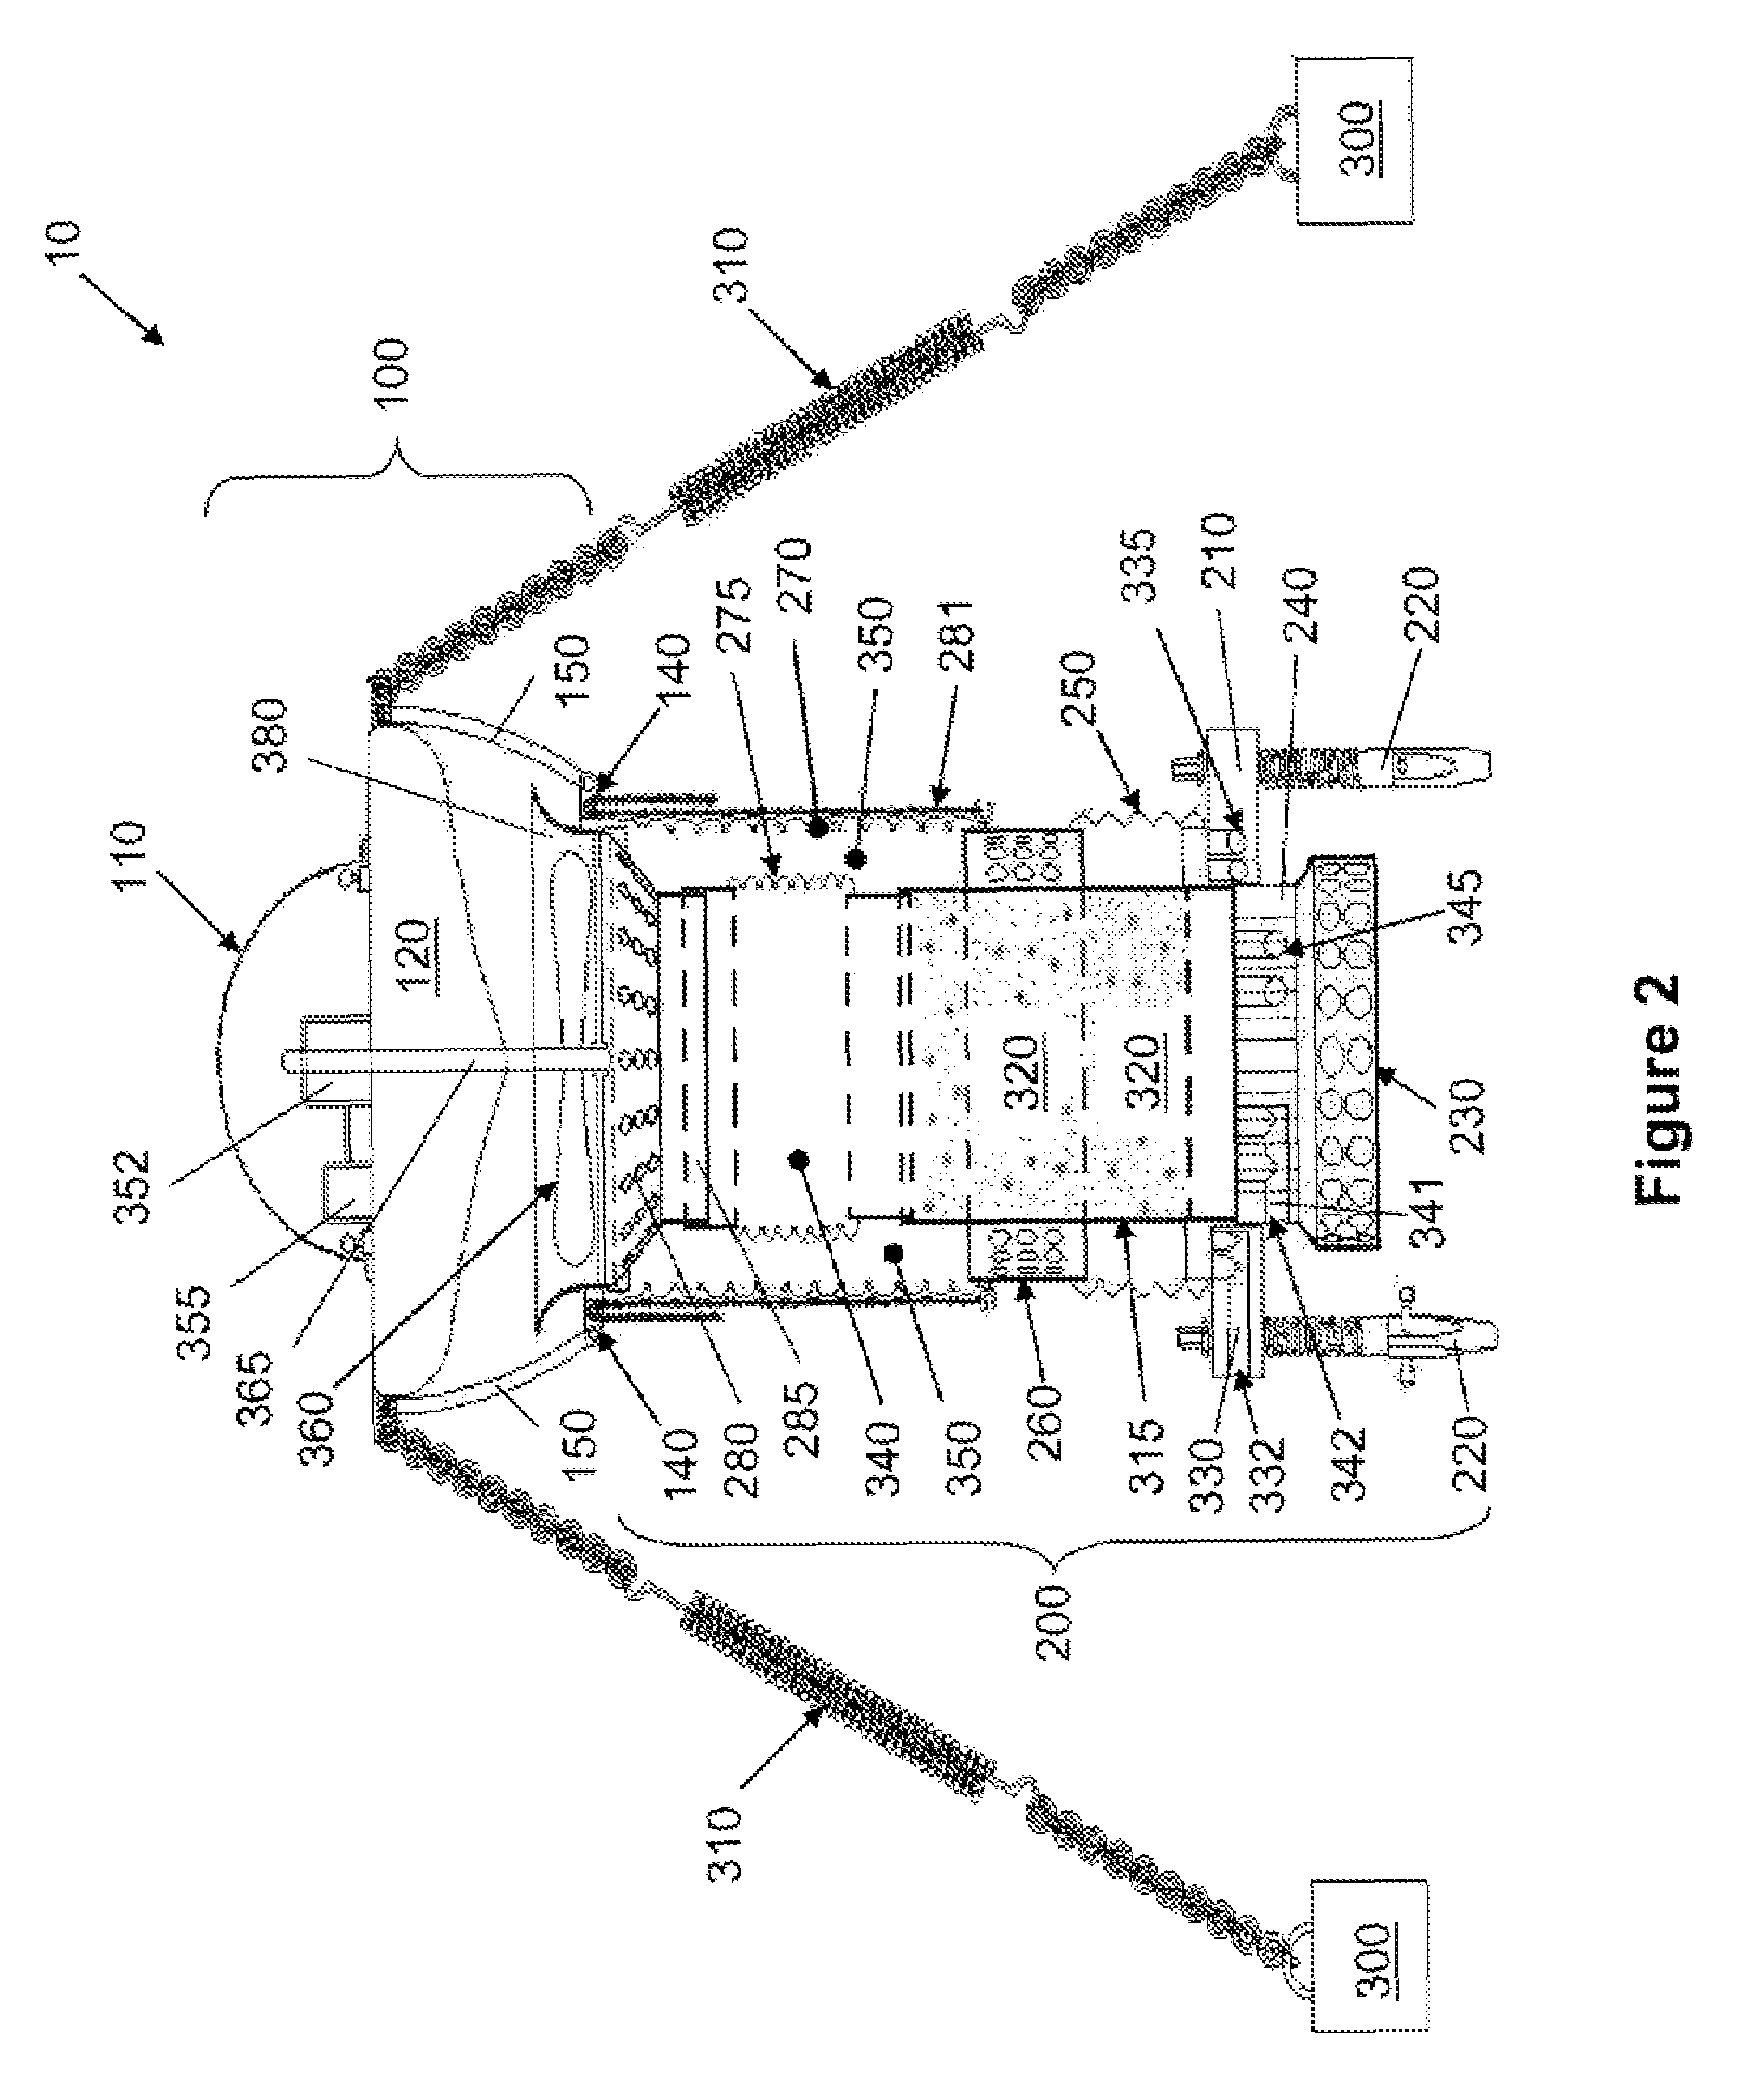 Integrated water treatment apparatus and methods for natural water improvement